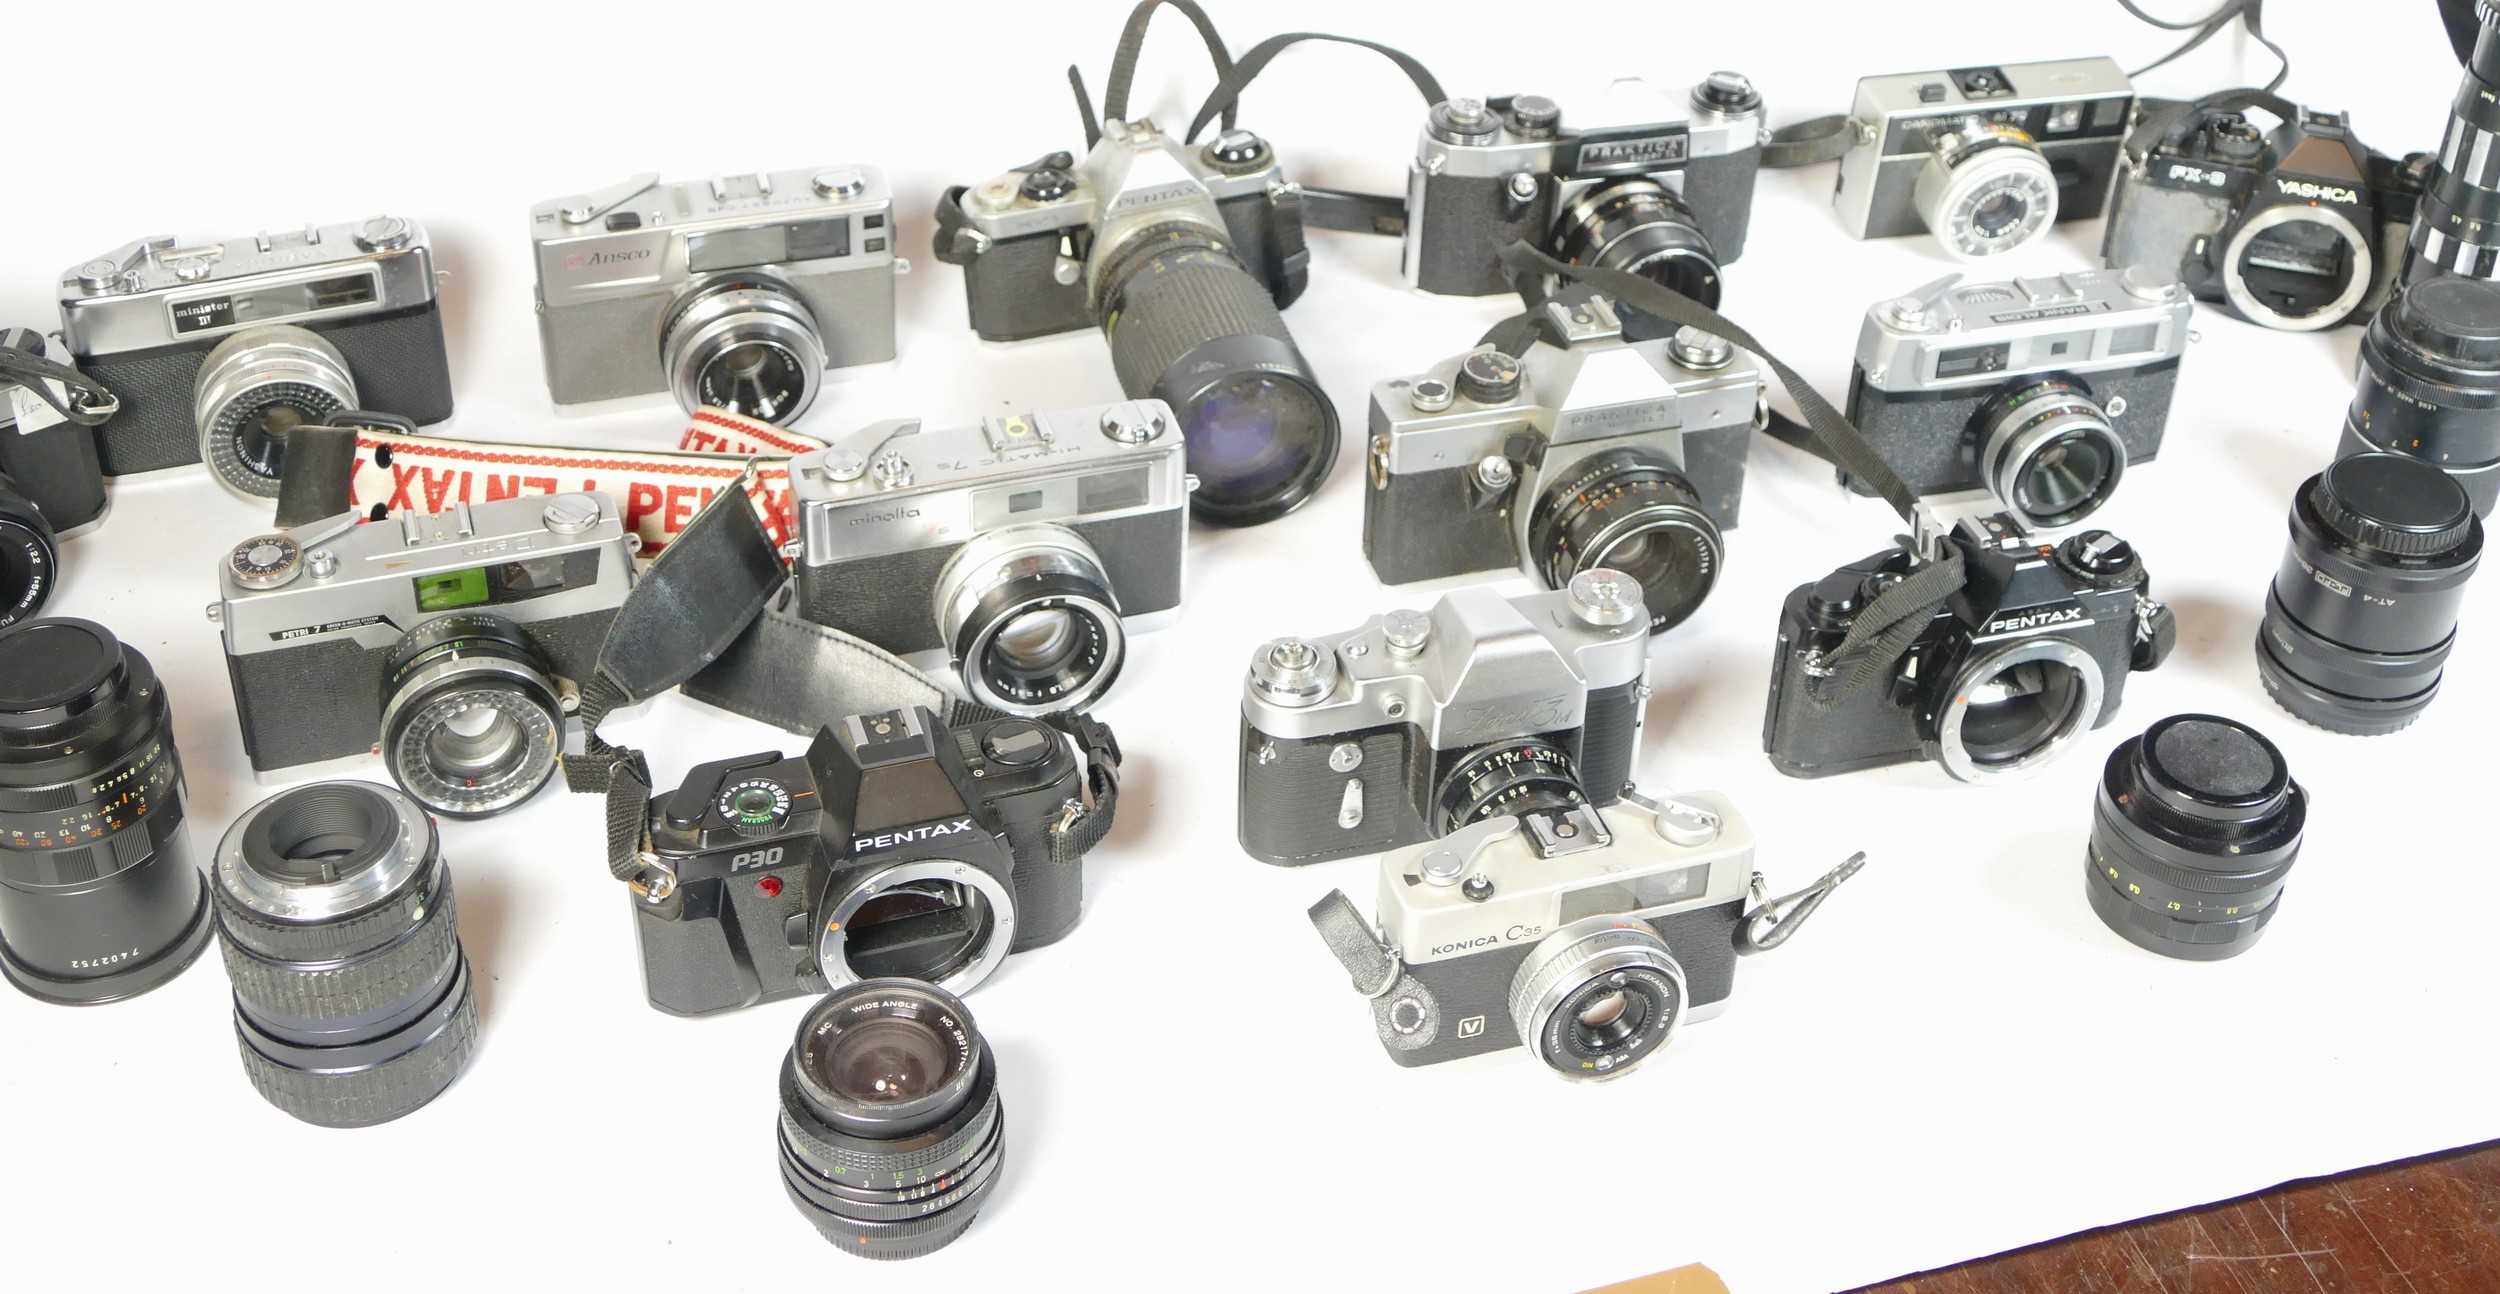 Fifteen SLR vintage film cameras to include a Yashica FX3, a Pentax MV1, a Canon M70 and a Minolta - Image 2 of 3